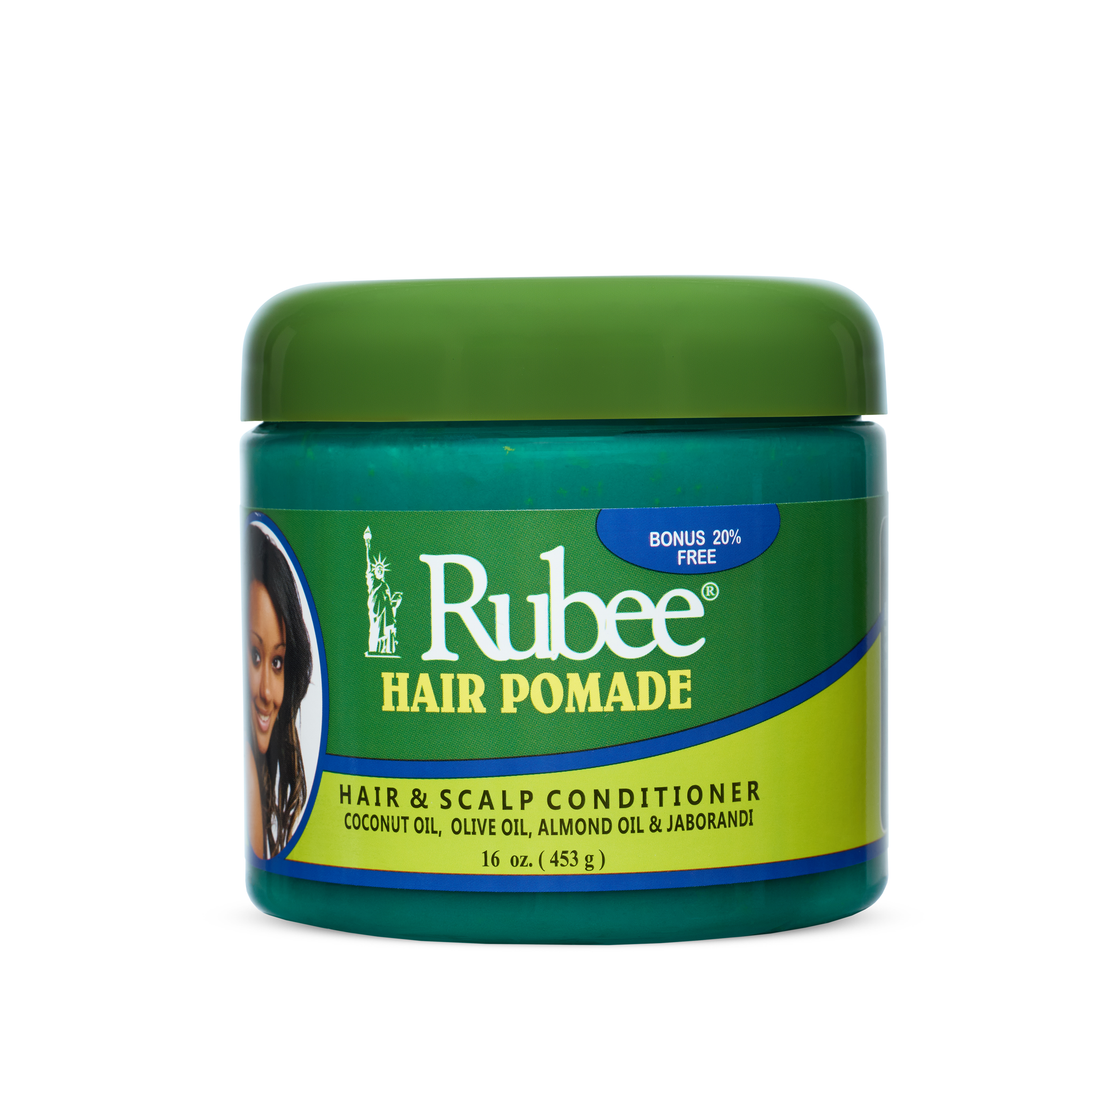 Rubee Hair Pomade Hair &amp; Scalp Conditioner